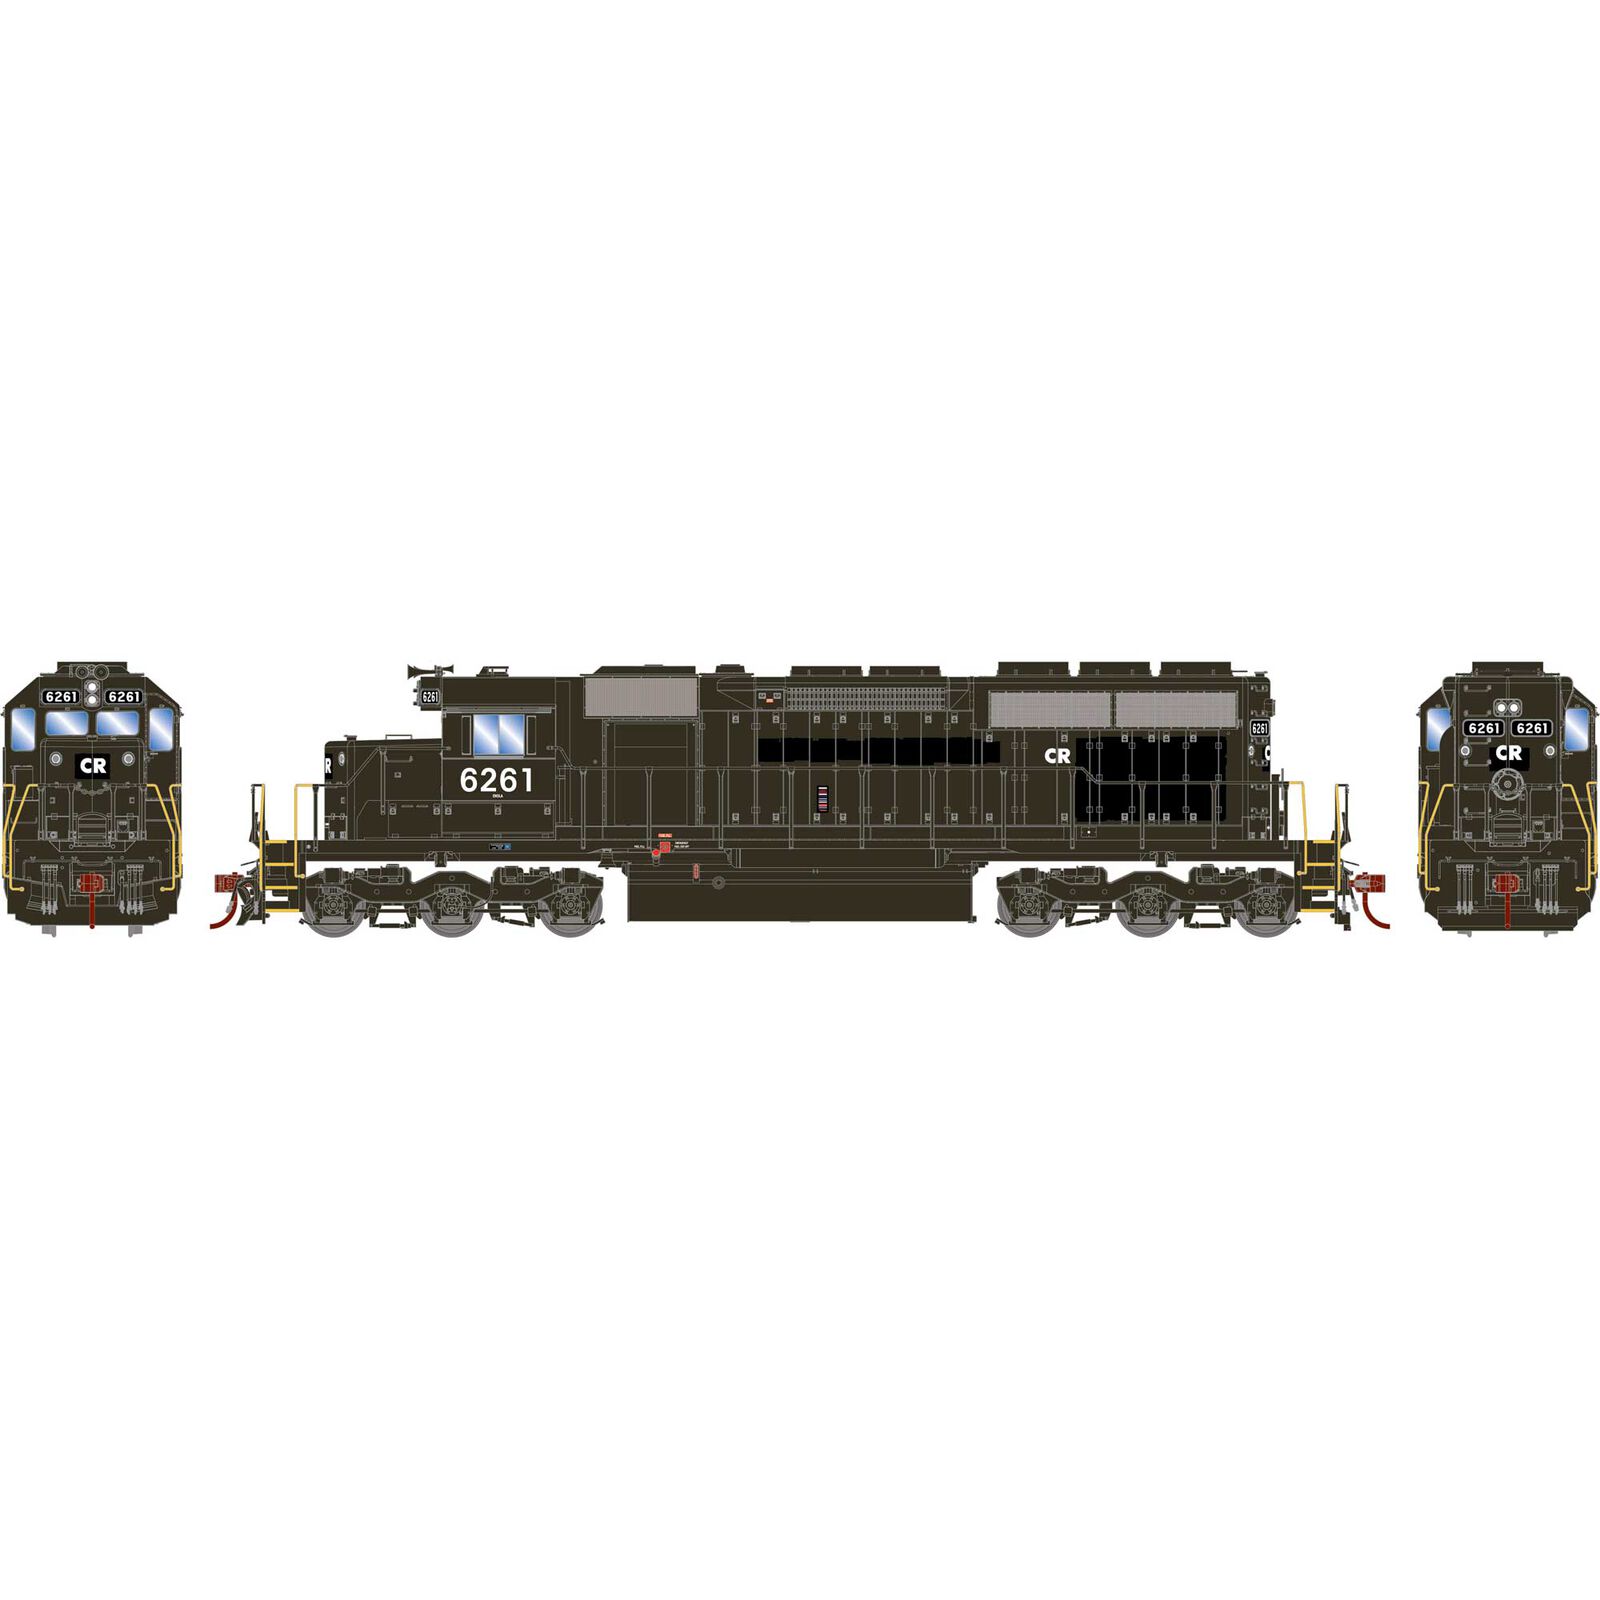 HO SD40 Locomotive, CR / PC Patched #6261